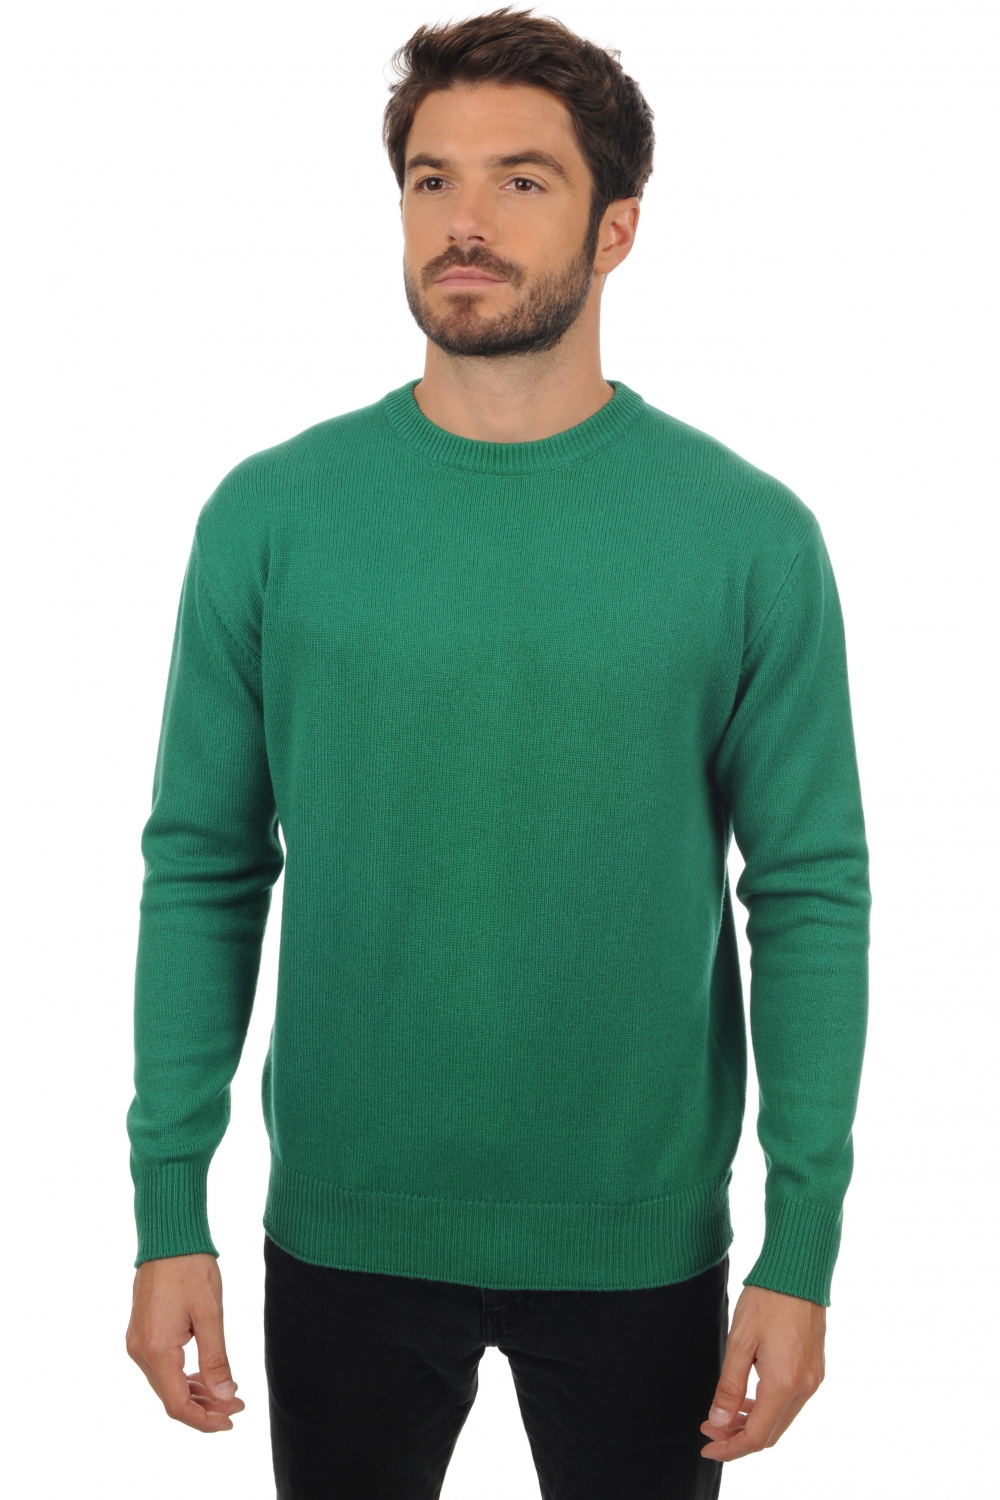 Cachemire pull homme col rond nestor 4f vert anglais xl